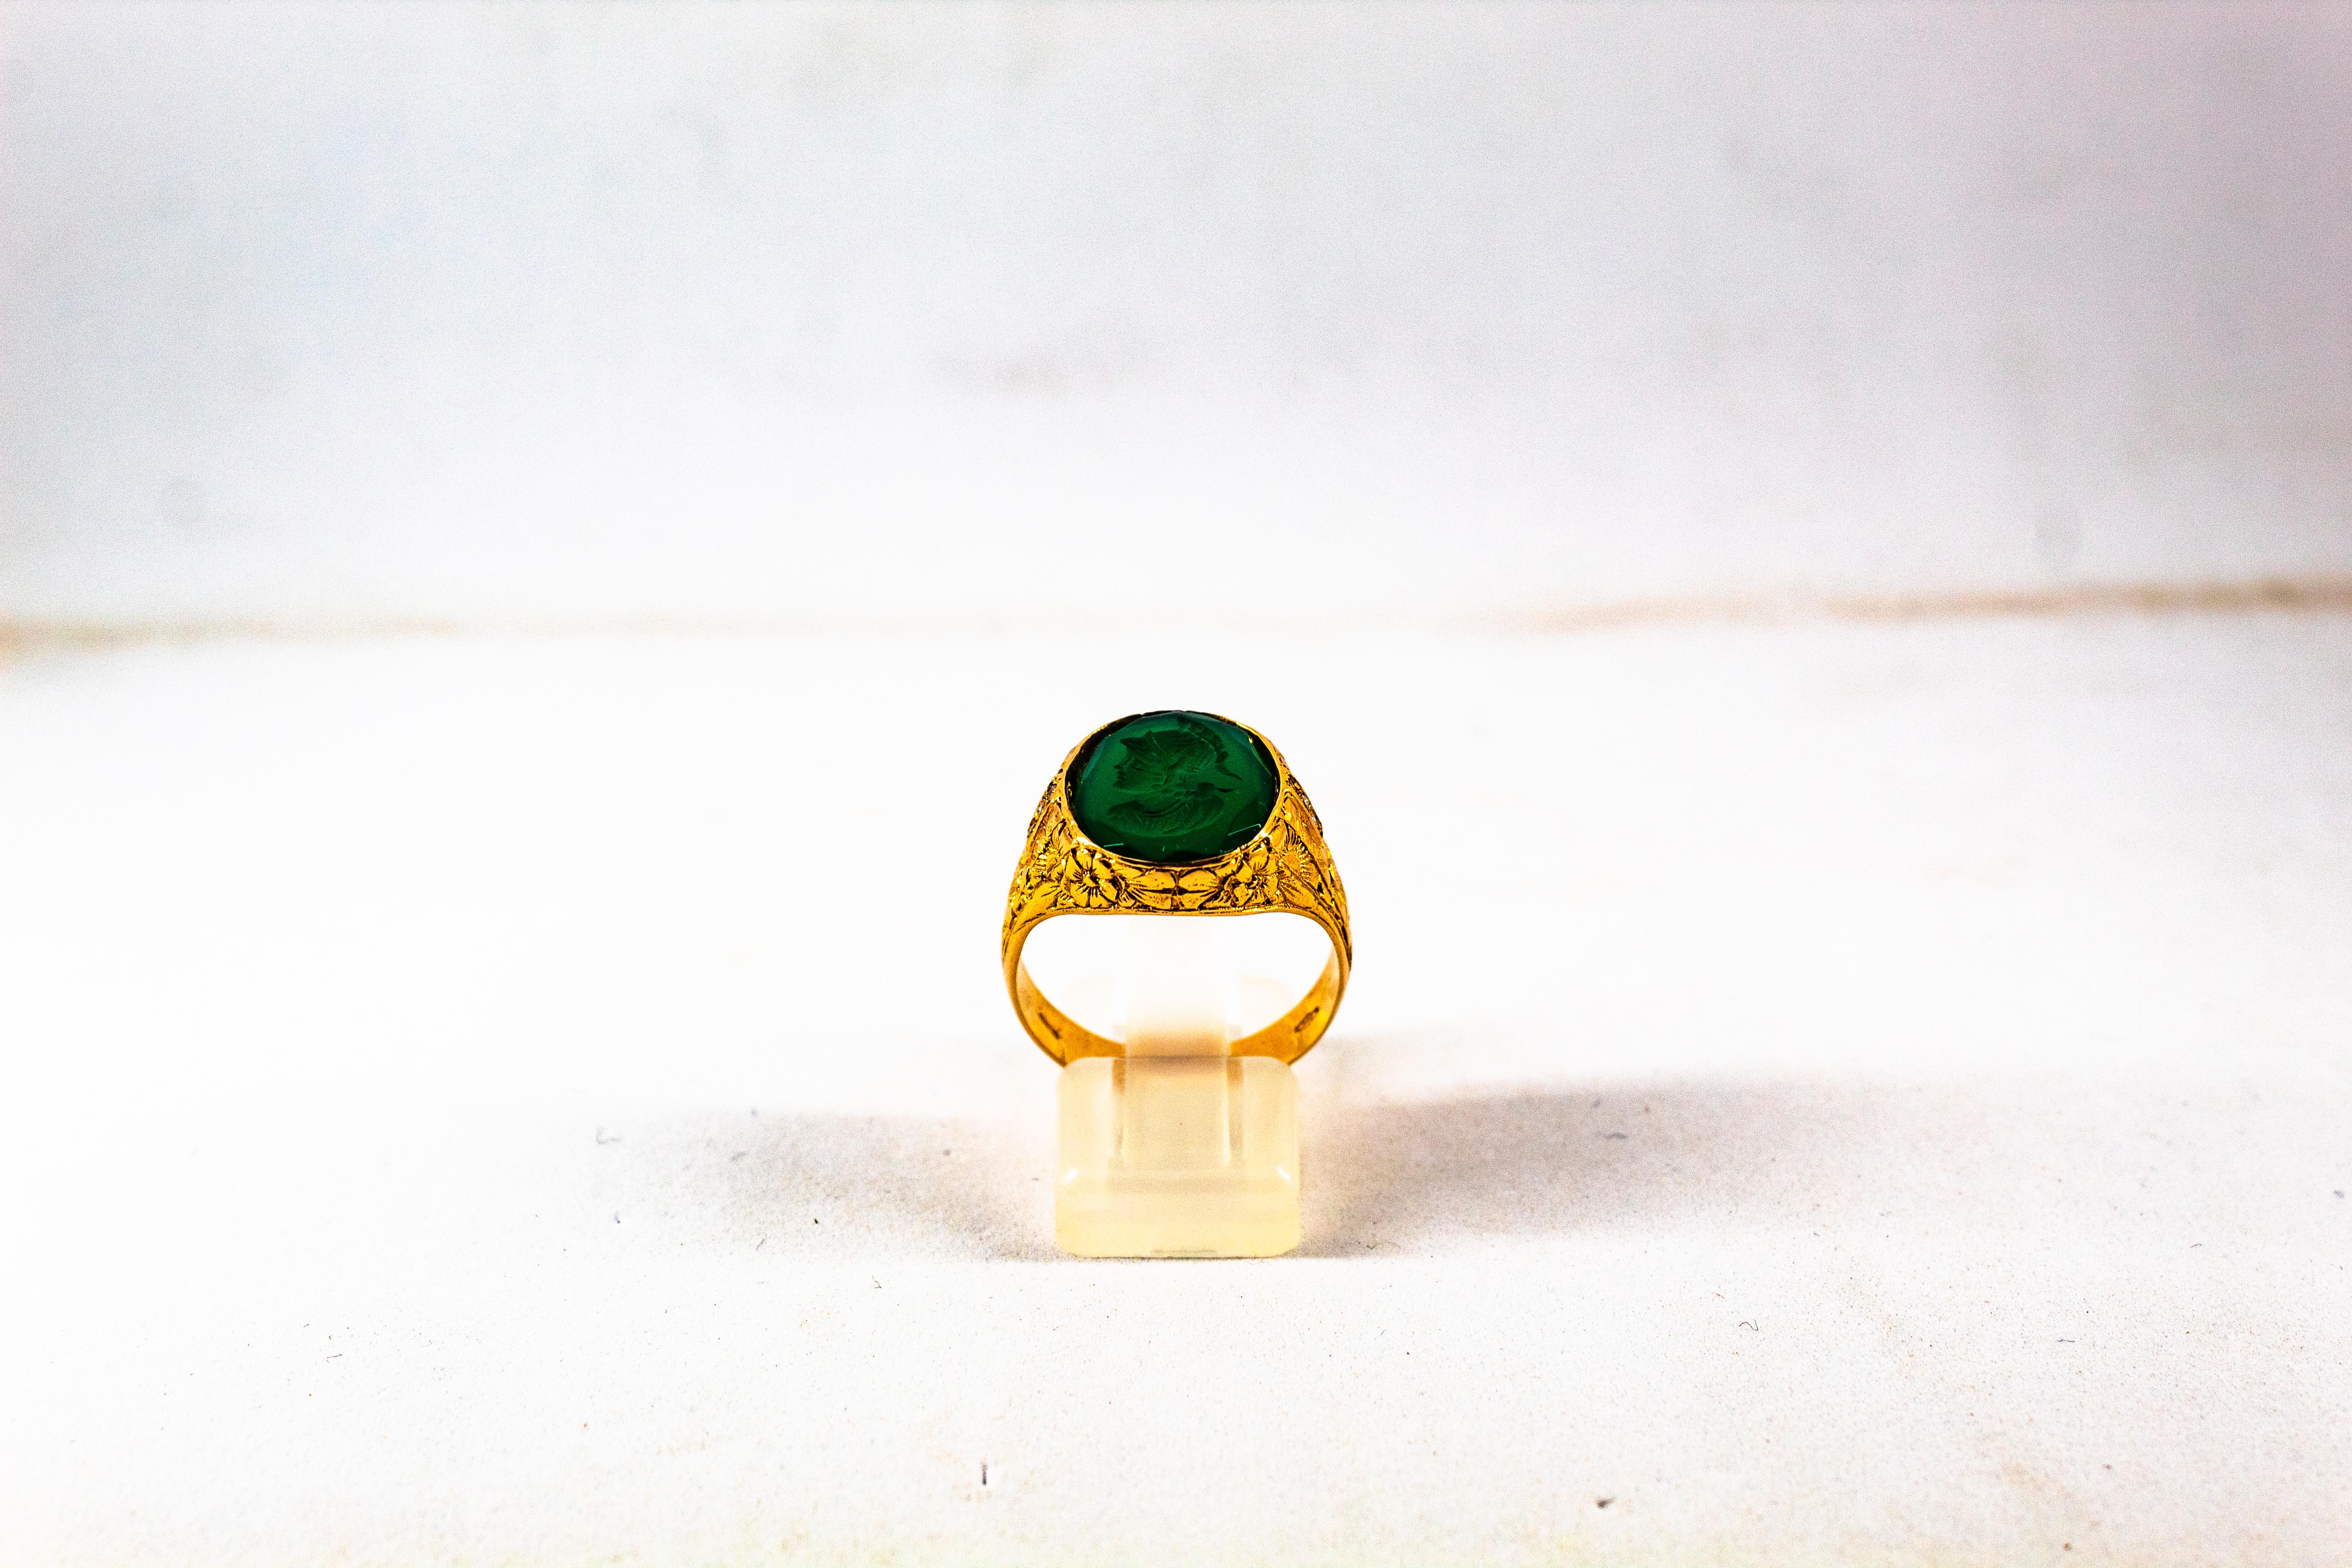 This Ring is made of 14K Yellow Gold.
This Ring has 0.06 Carats White Modern Round Cut Diamonds.
This Ring has a Carved Carnelian represents a Roman Soldier.
Size ITA: 20 USA: 9
We're a workshop so every piece is handmade, customizable and resizable.